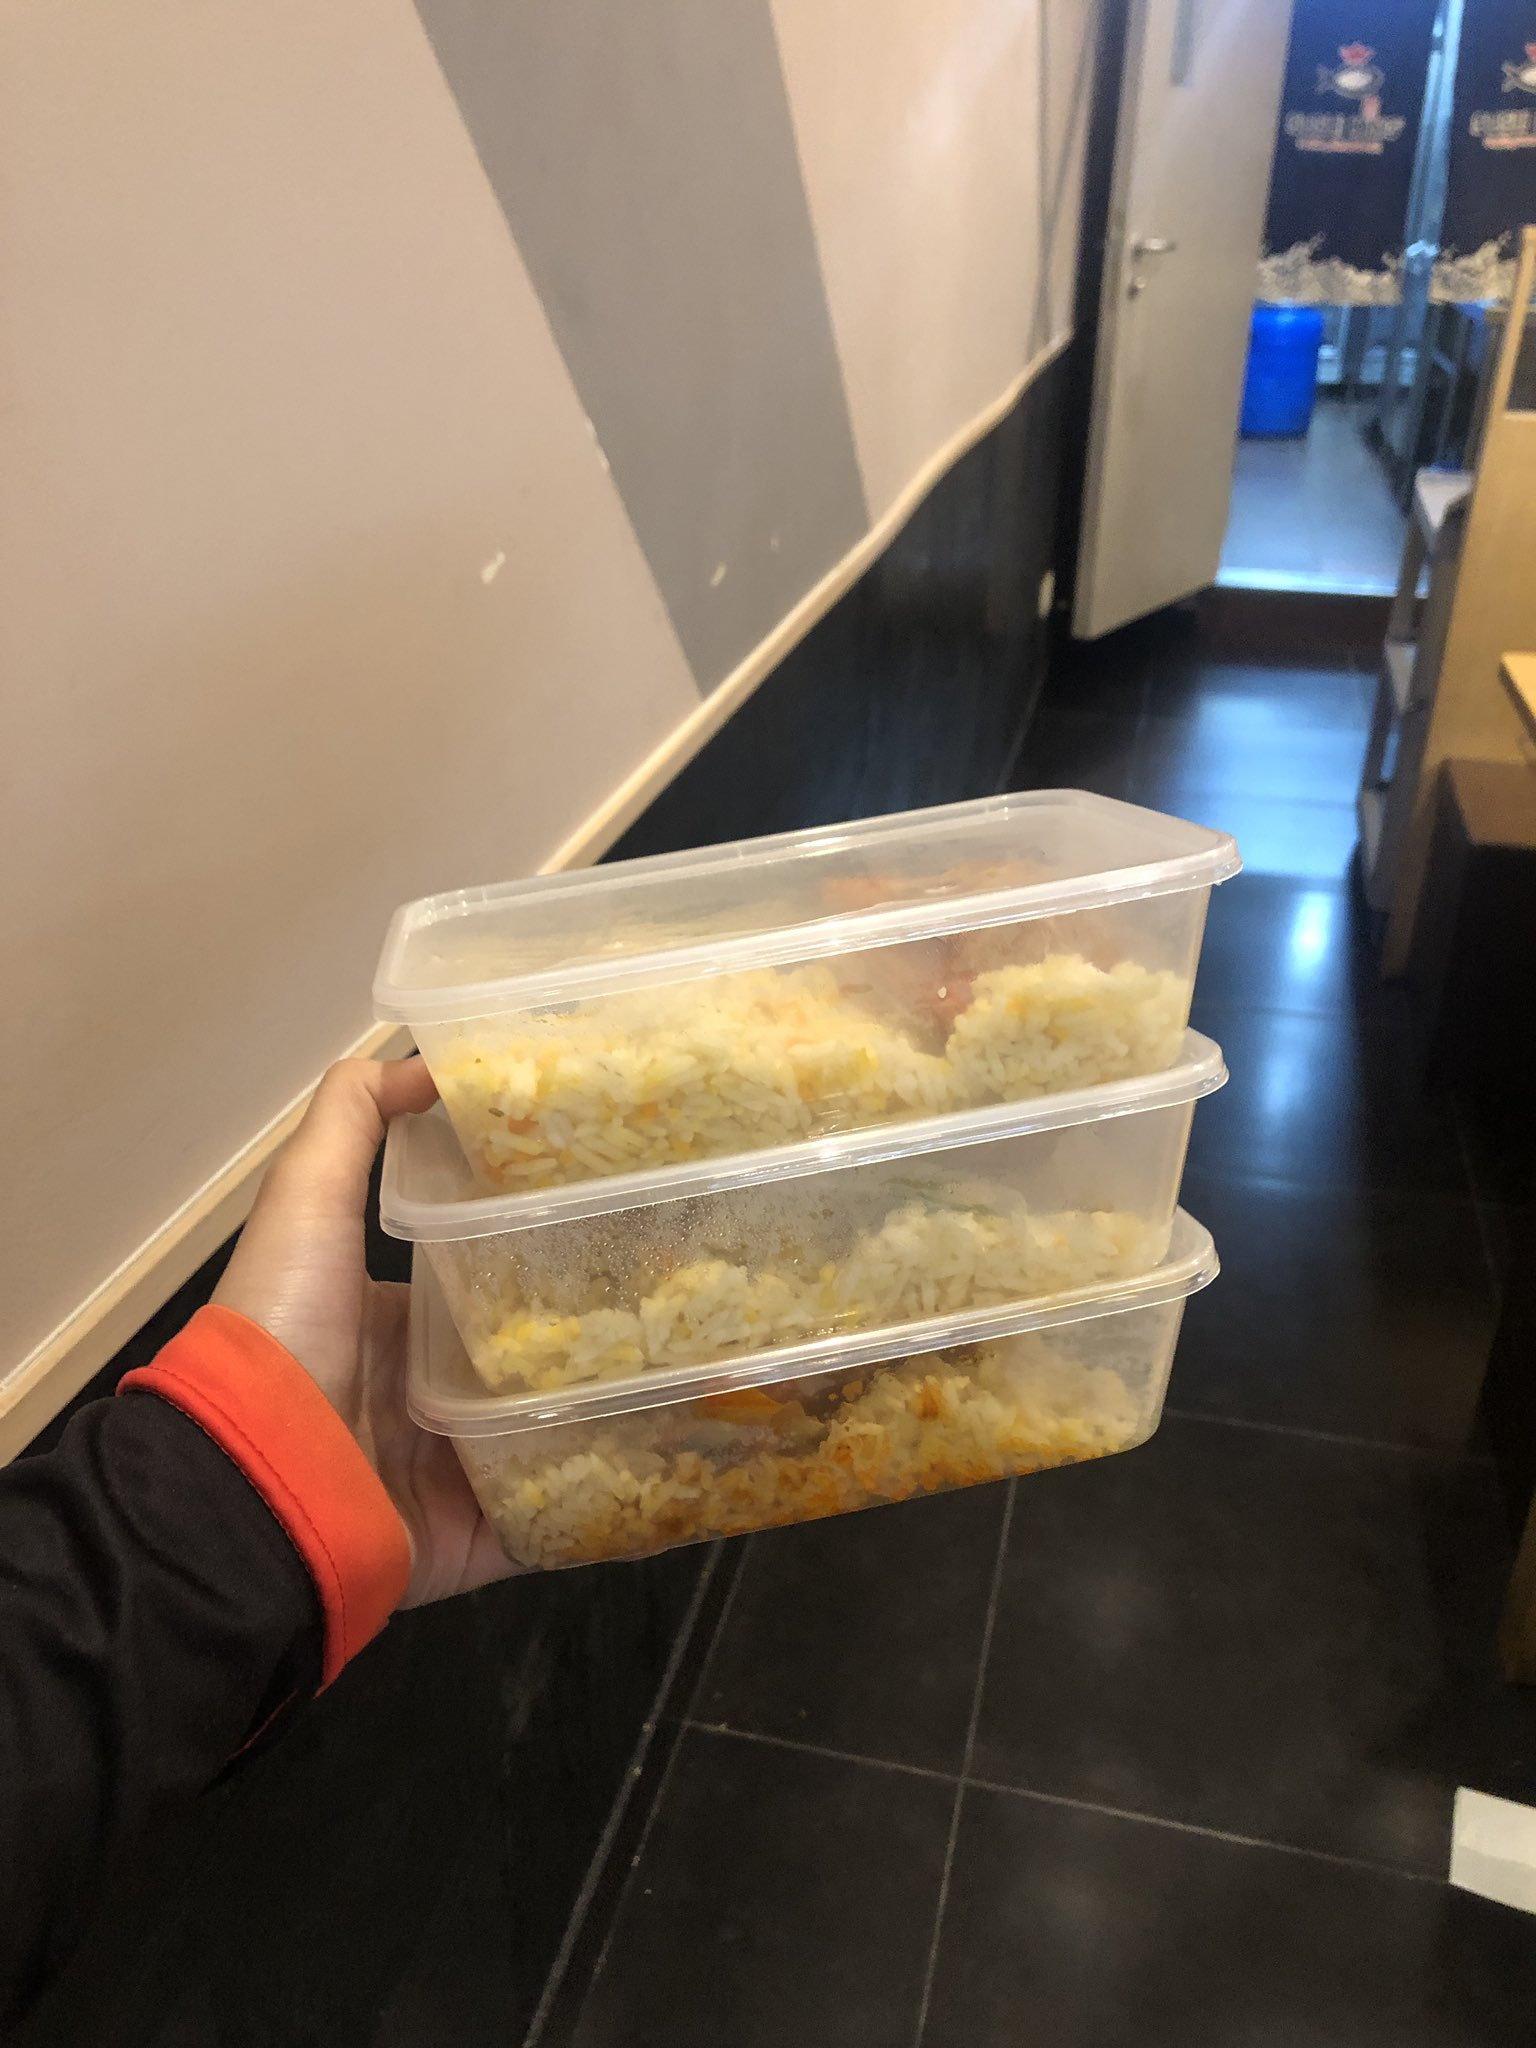 M'sian woman seen selling meals at klia2 to fund cancer treatment, netizens come together to help